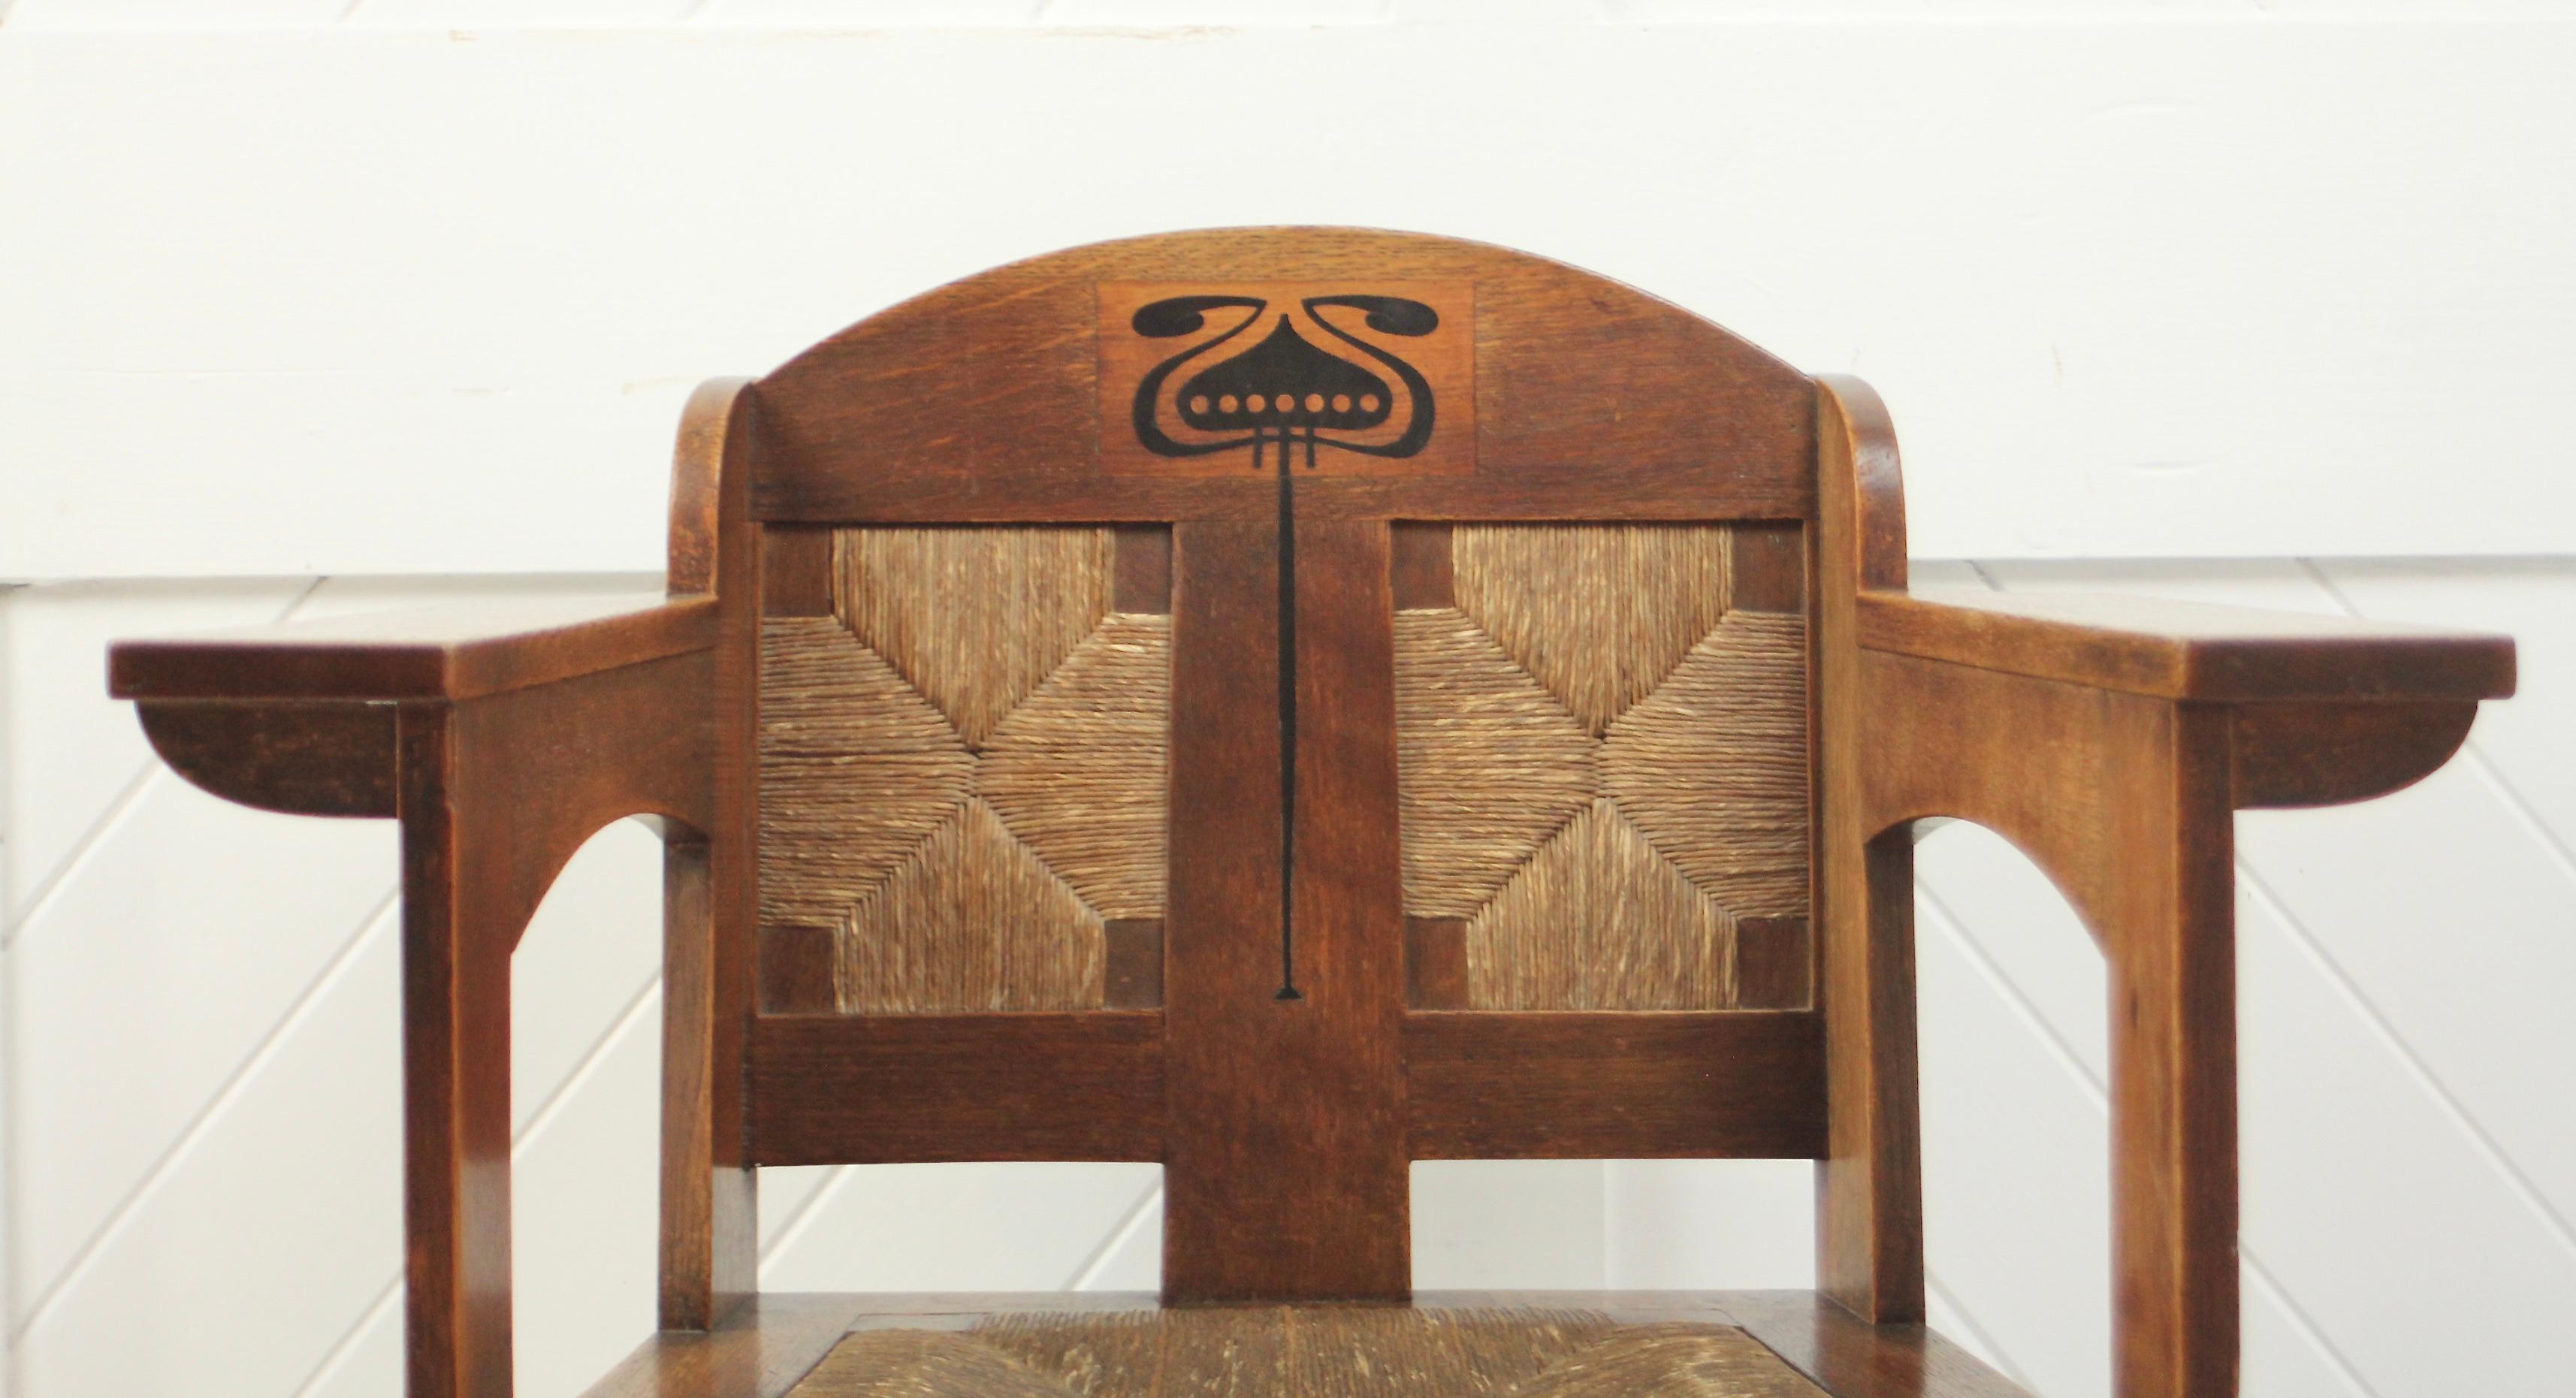 Iconic Arts & Crafts oak armchair

Original rush seat and back panels

Stylised ebony floral decorative inlay

Designed by E G Punnett

For William Birch

Circa 1900

Book image courtesy of: Pictorial Dictionary of British 19th Century Furniture